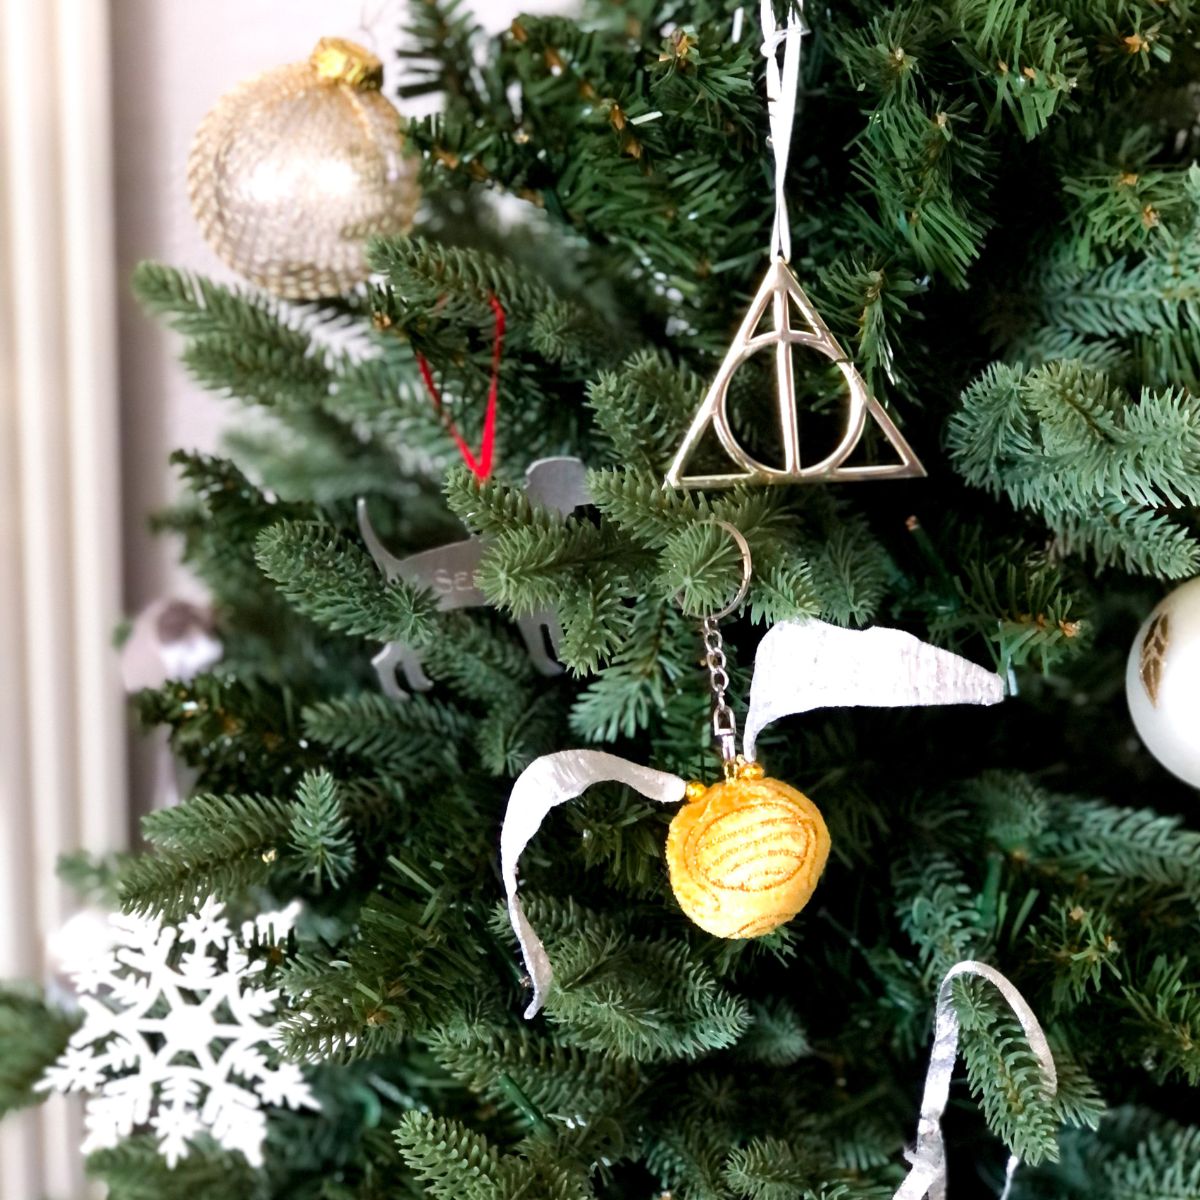 bookish Harry Potter ornaments on a Christmas tree